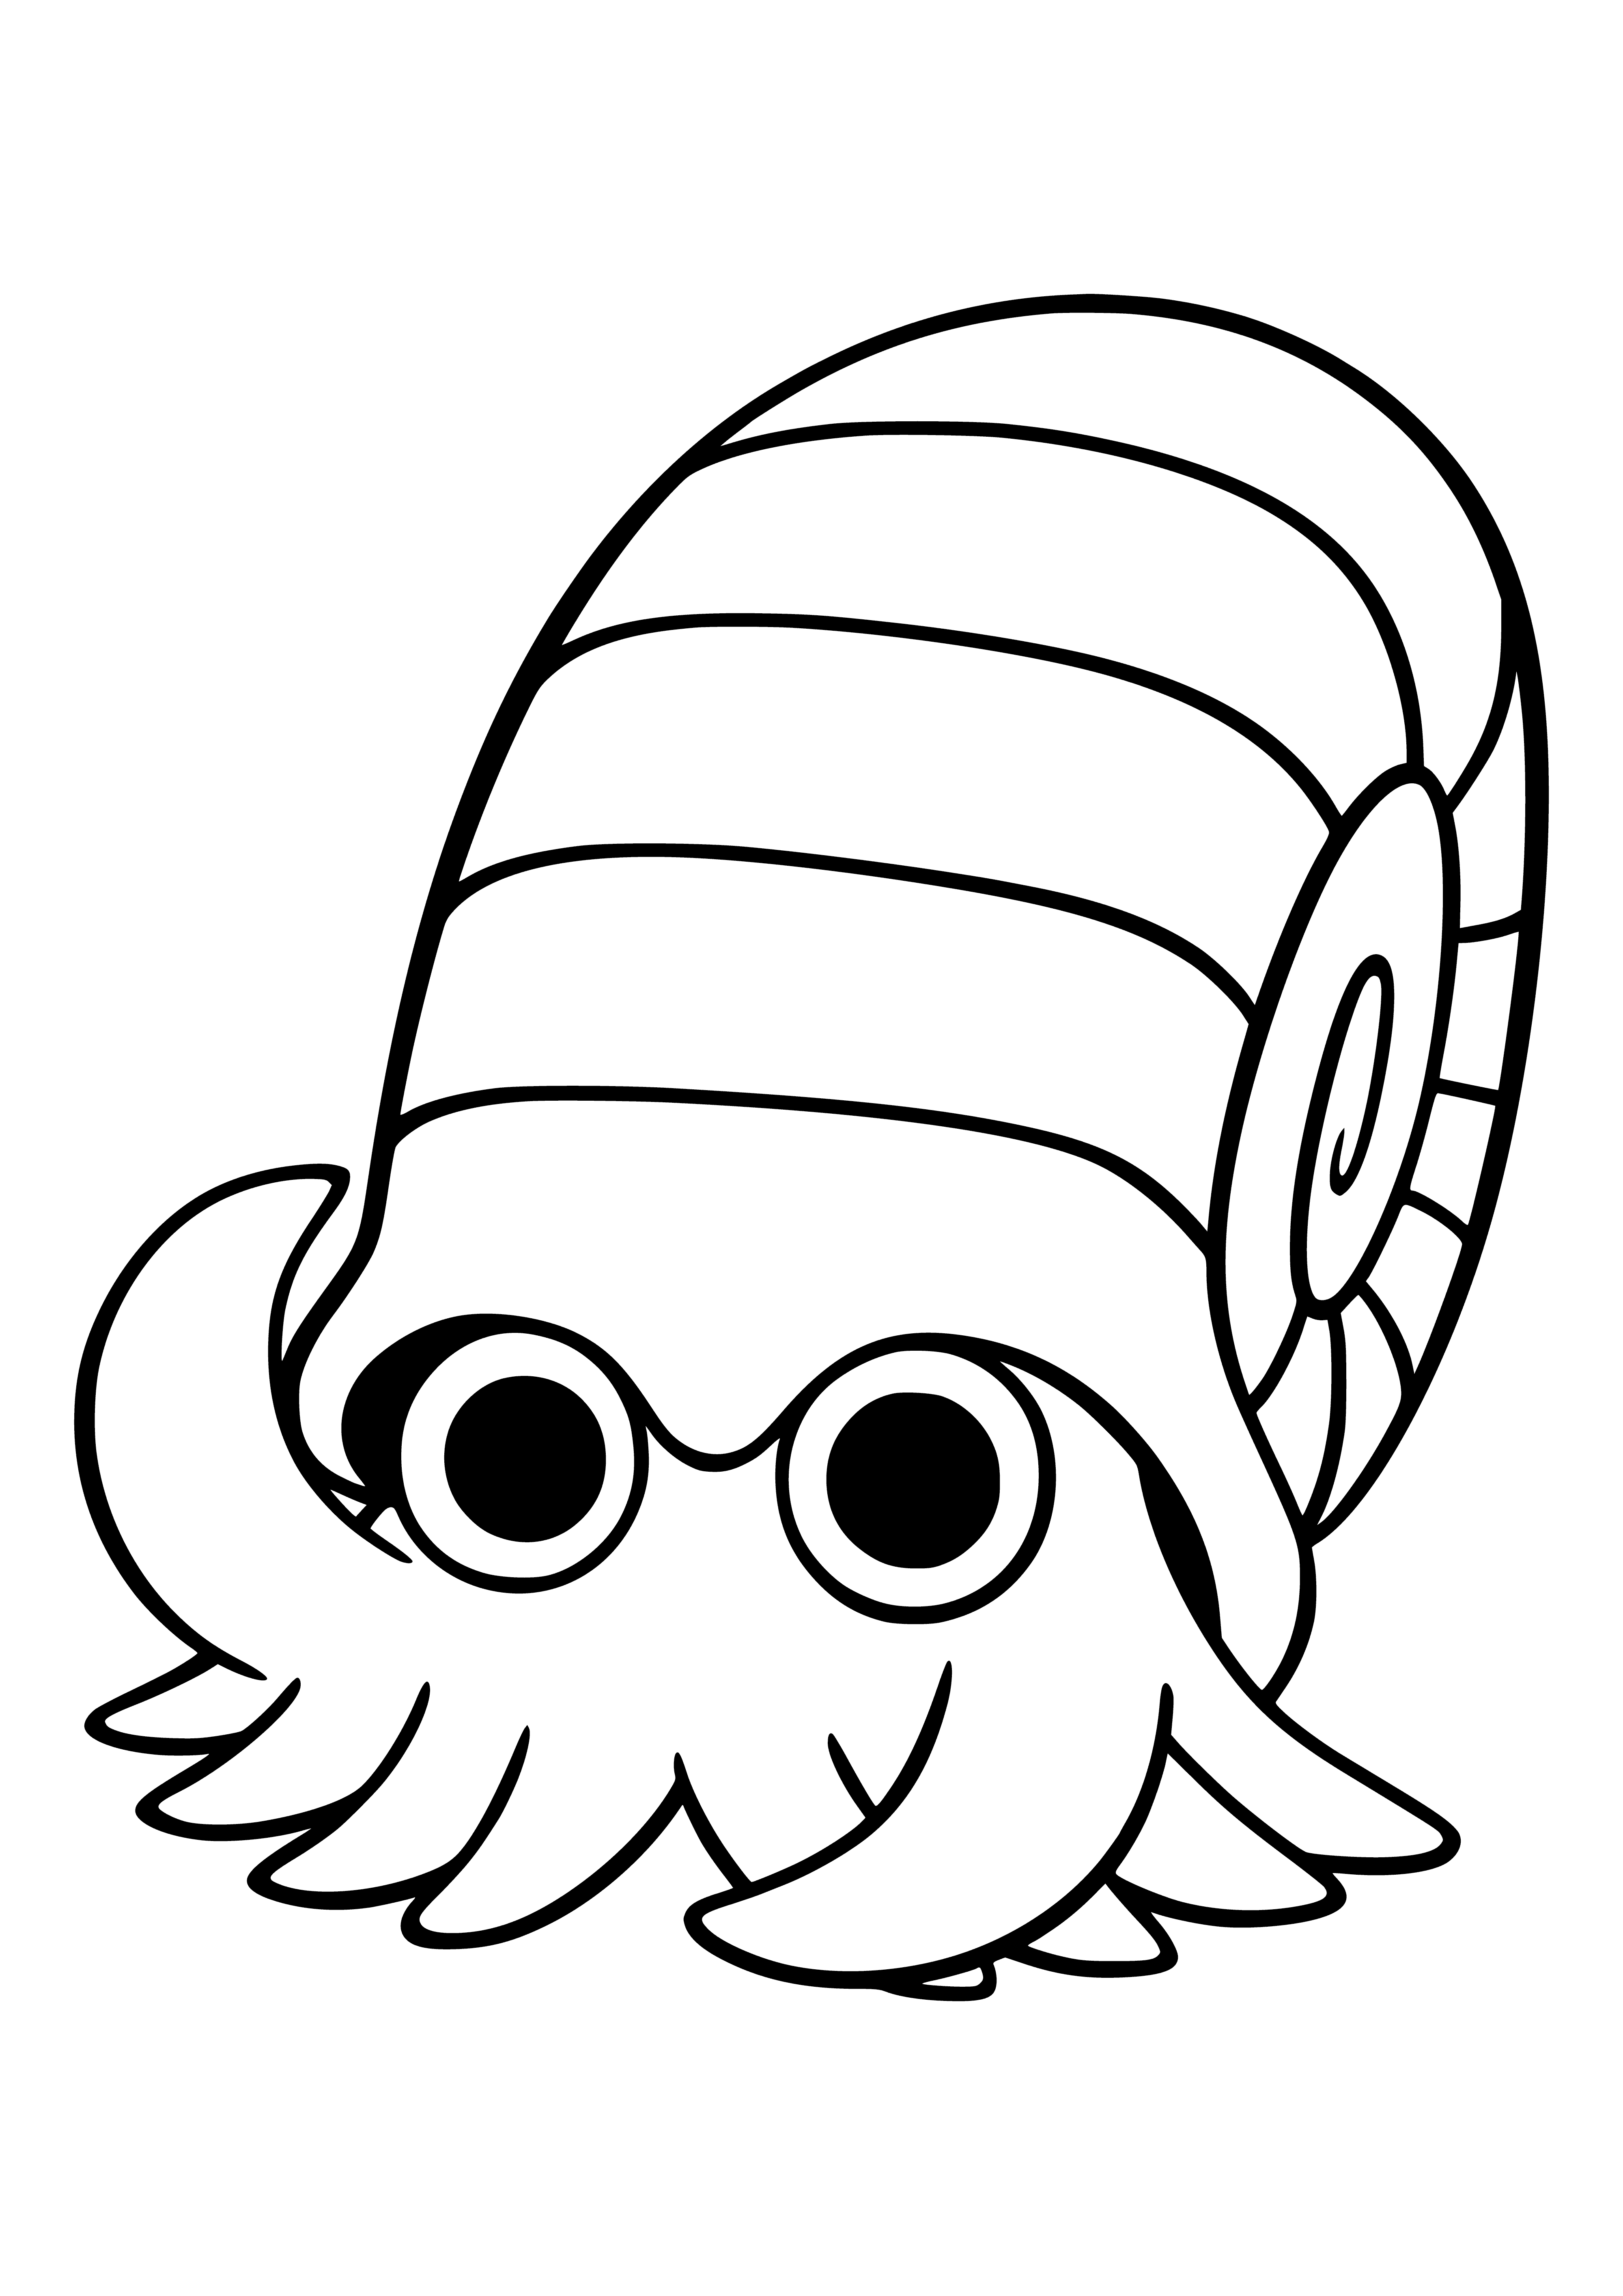 Pokemon Omanyte coloring page